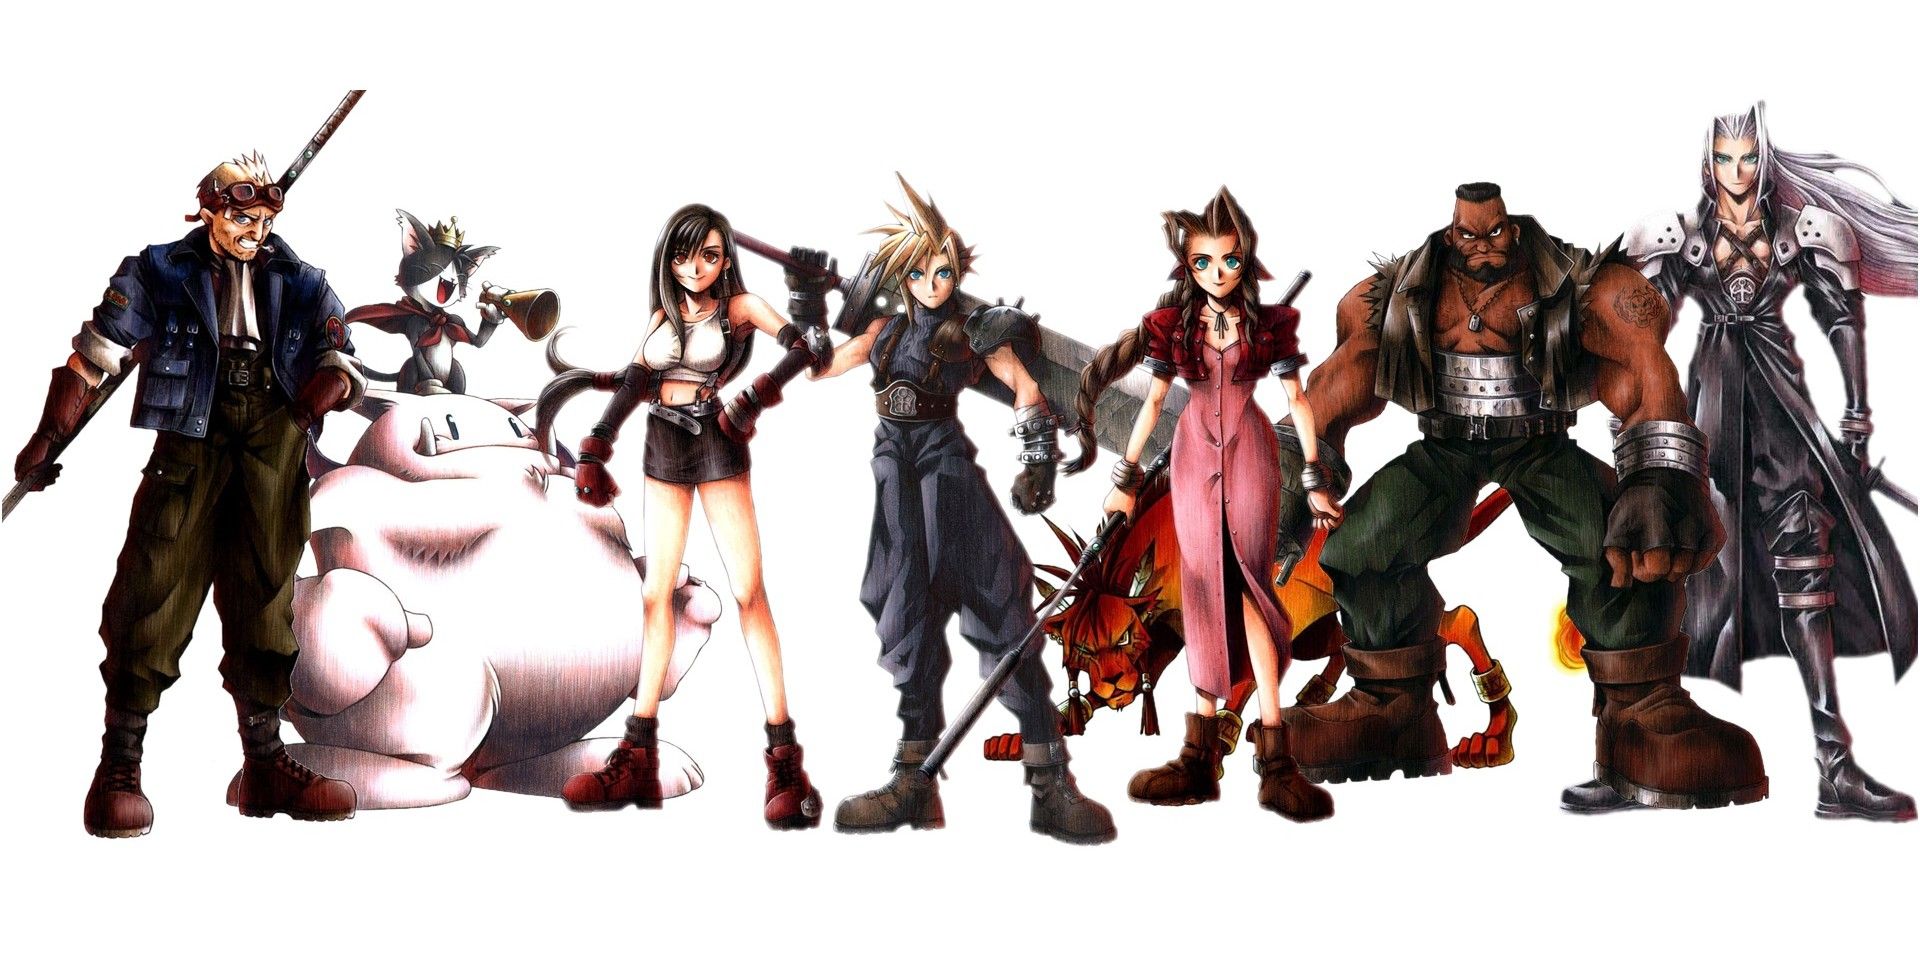 Best Order To Play The Final Fantasy 7 Games Crisis Core Cerberus FF7 Remake